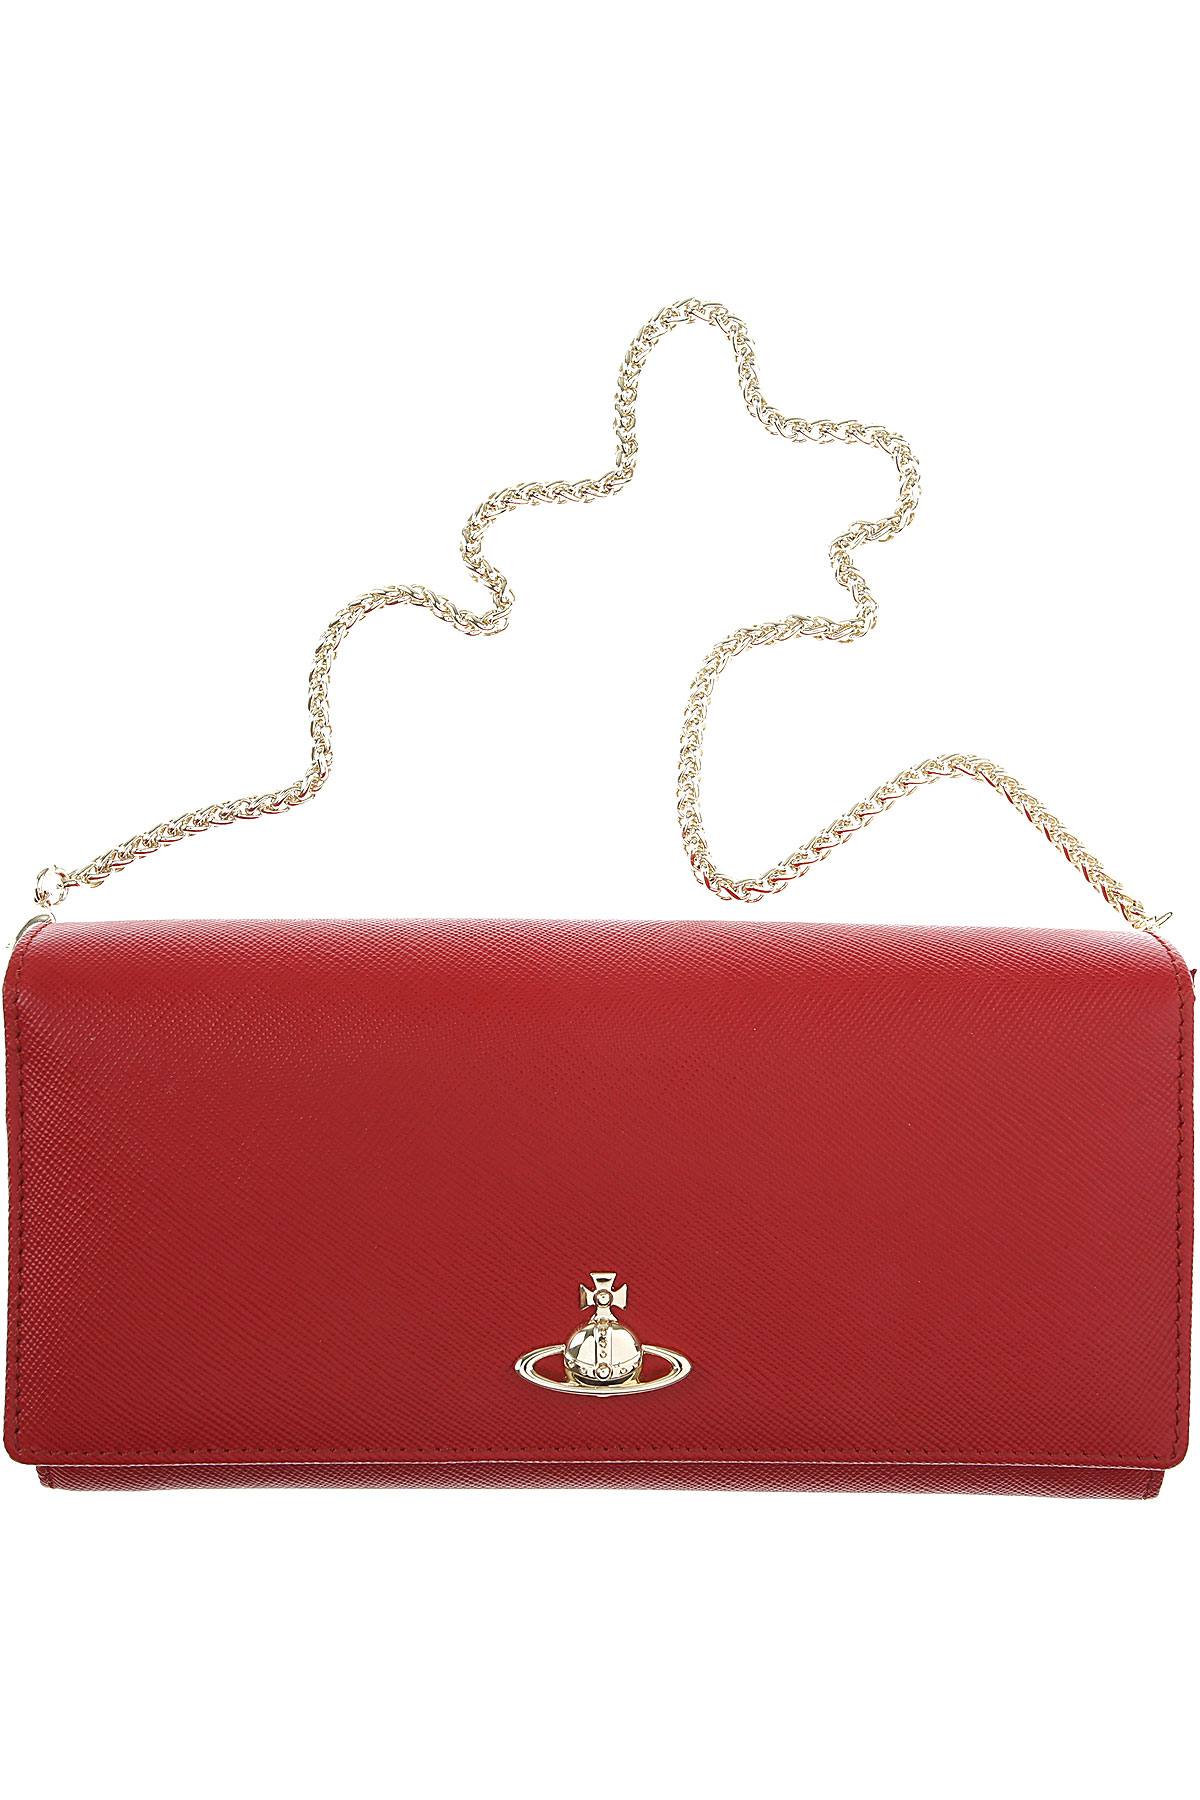 Womens Wallets Vivienne Westwood, Style code: 51030008-40187-rosso